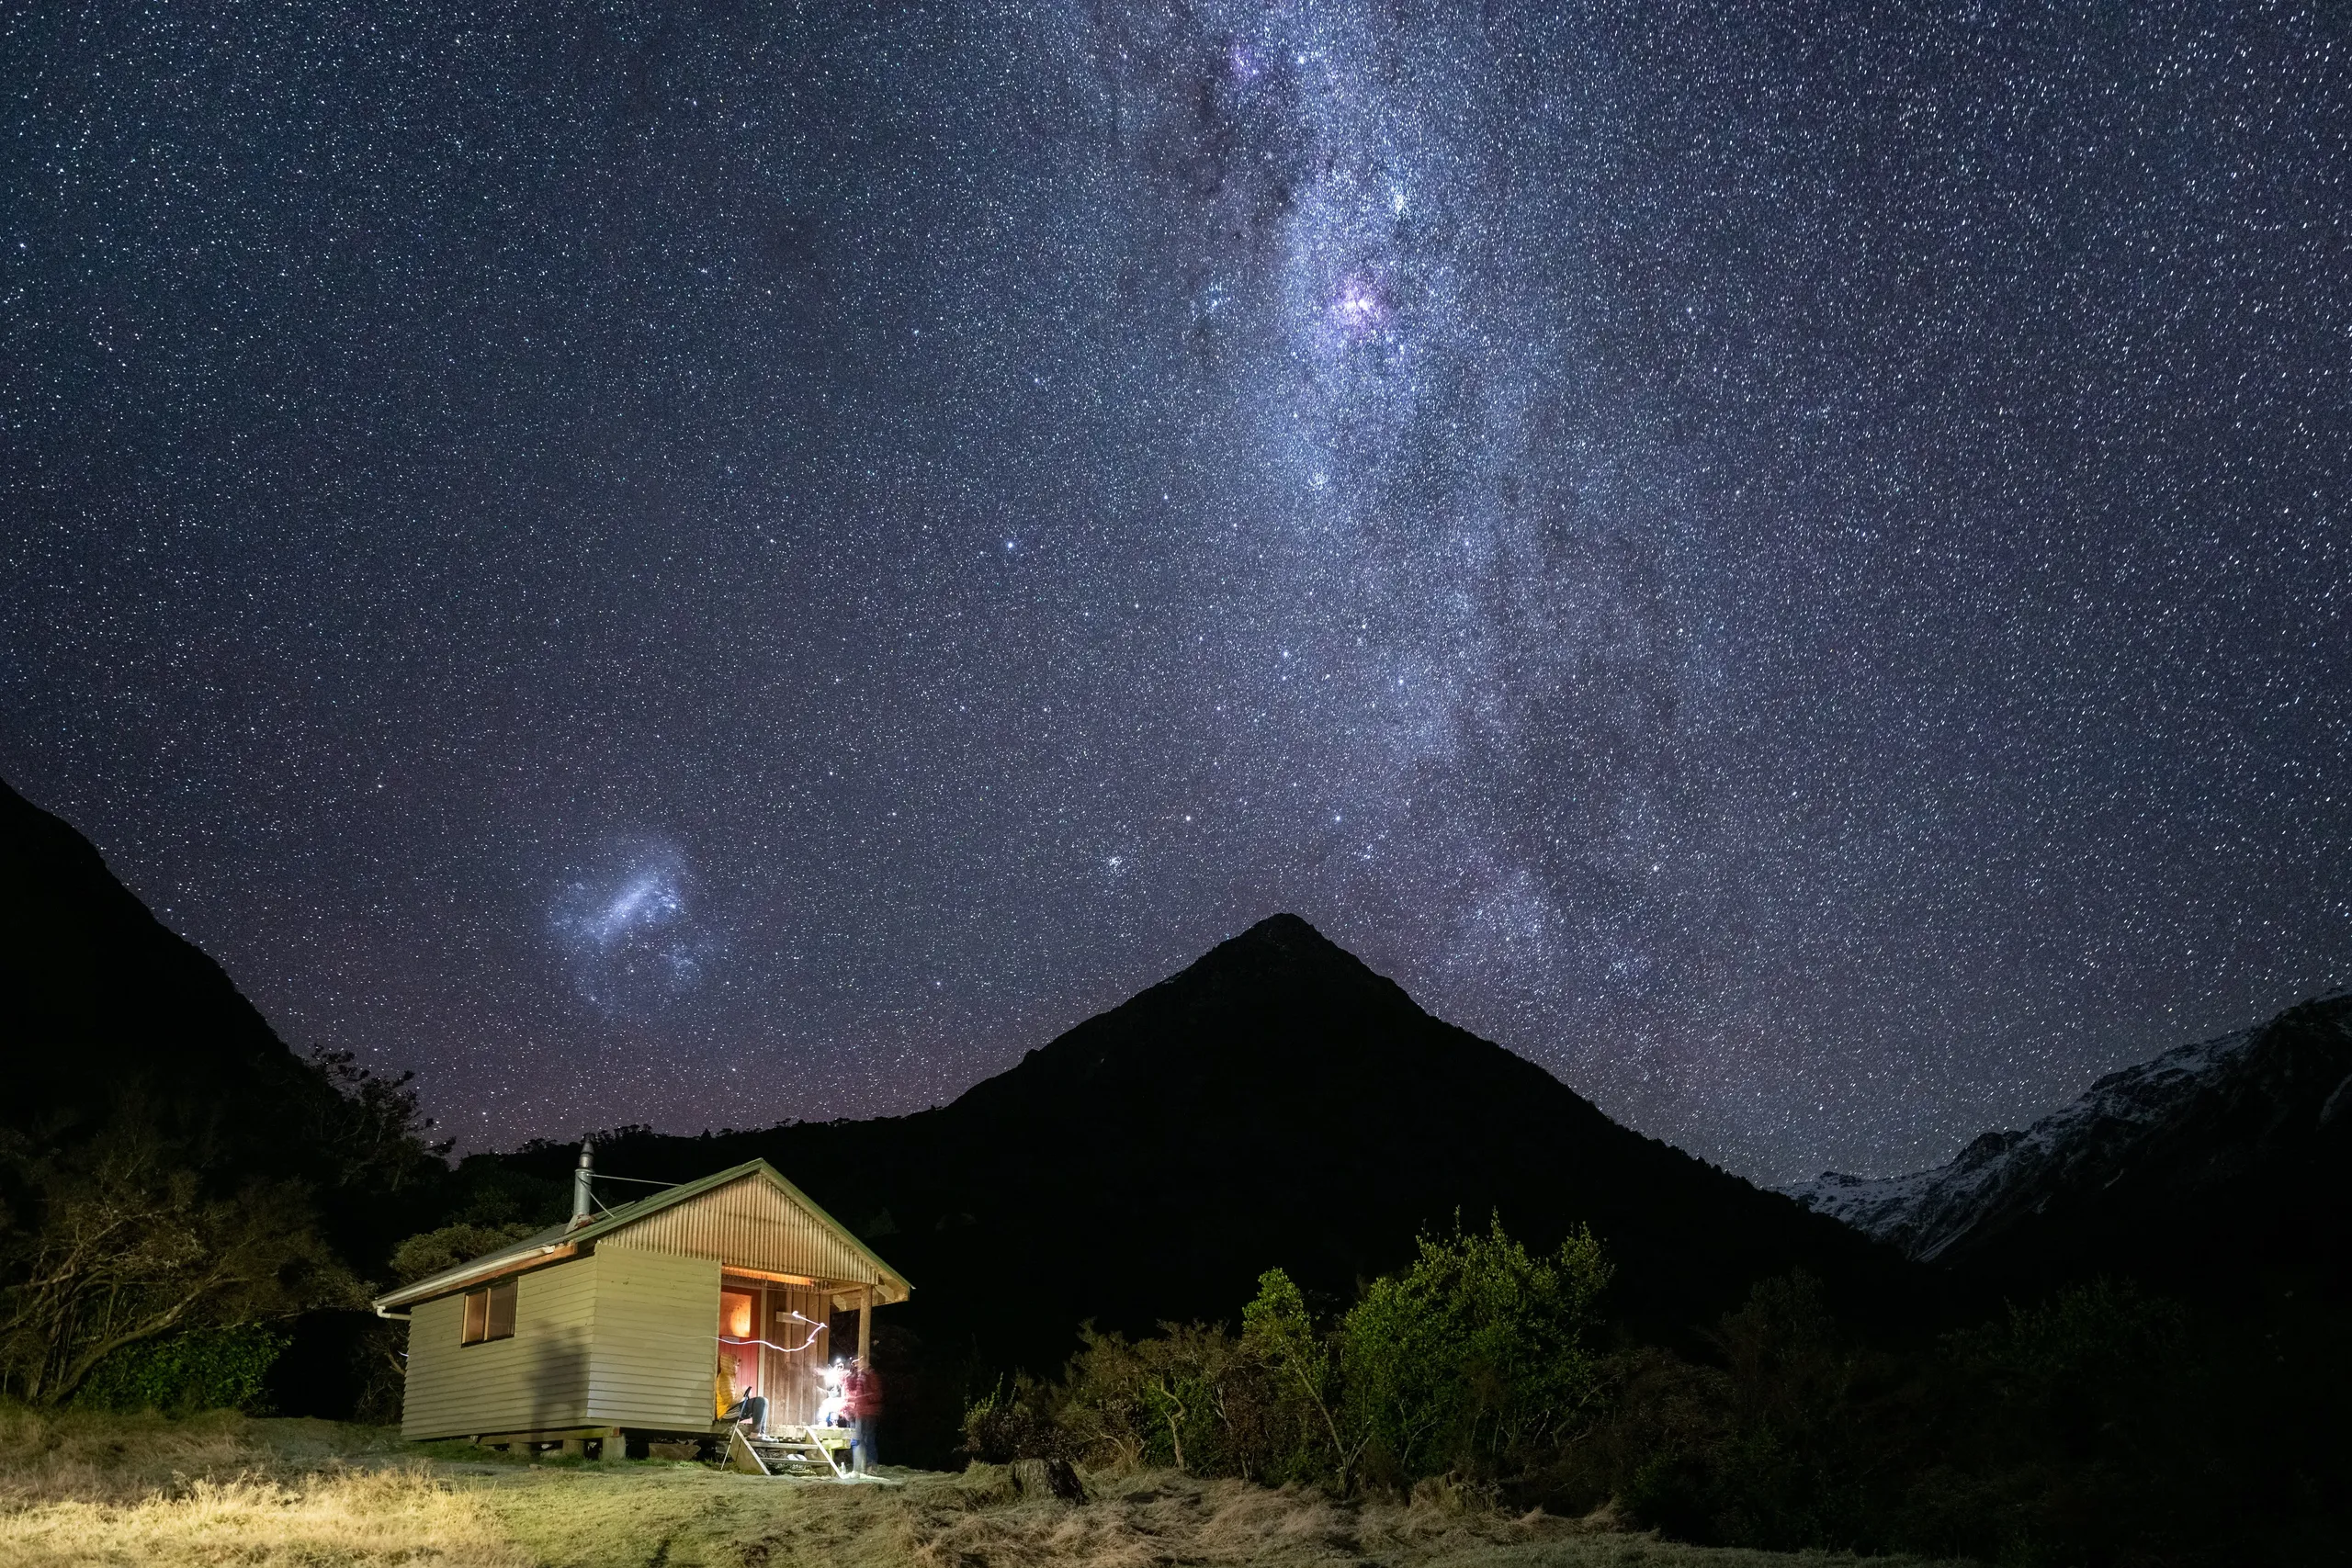 Stargazing on the balcony at Julia Hut. Grevilles Cone (centre) and Campbell Range (right) can be seen in the background - not to mention the Large Magellanic Cloud.